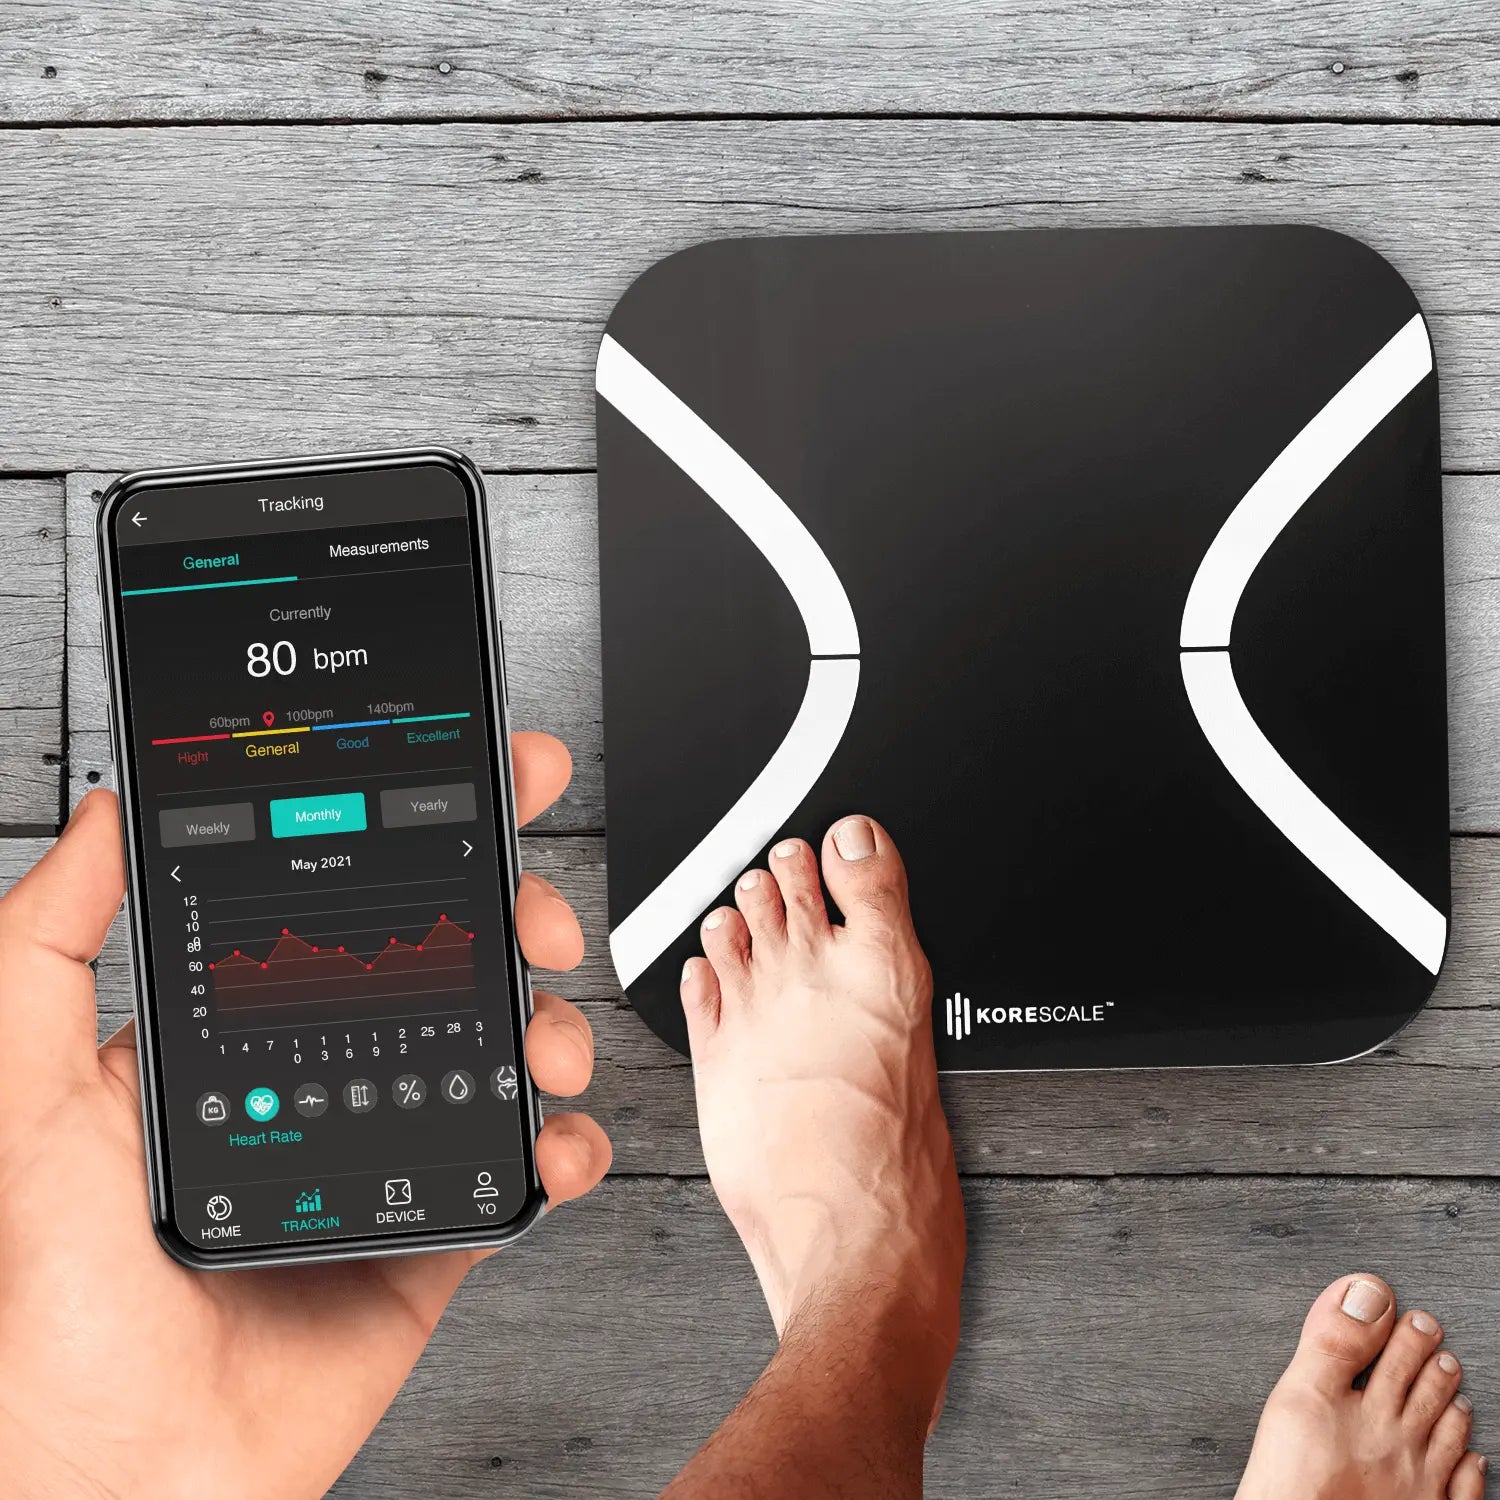 KoreScale G2 Smart Scale - Bluetooth Body Fat Scale with